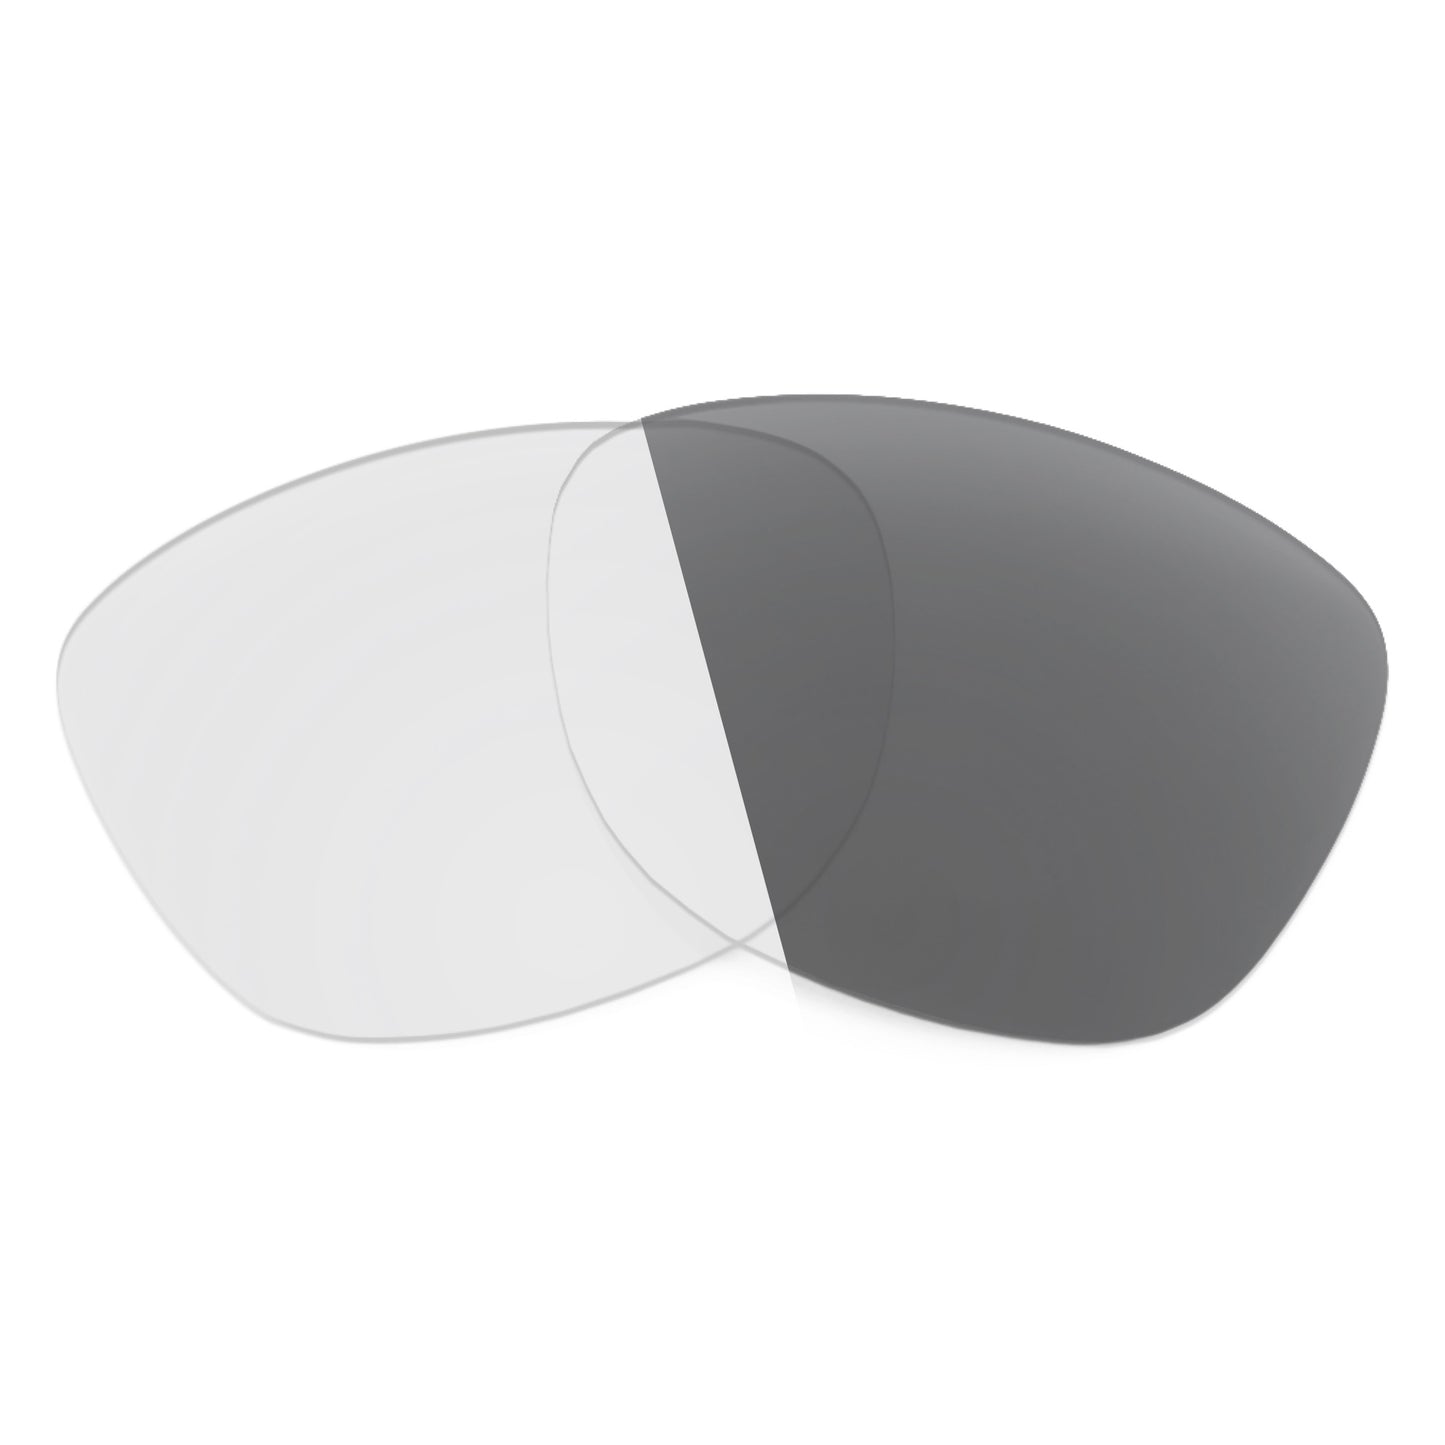 Revant replacement lenses for Ray-Ban RB4092 65mm Non-Polarized Adapt Gray Photochromic